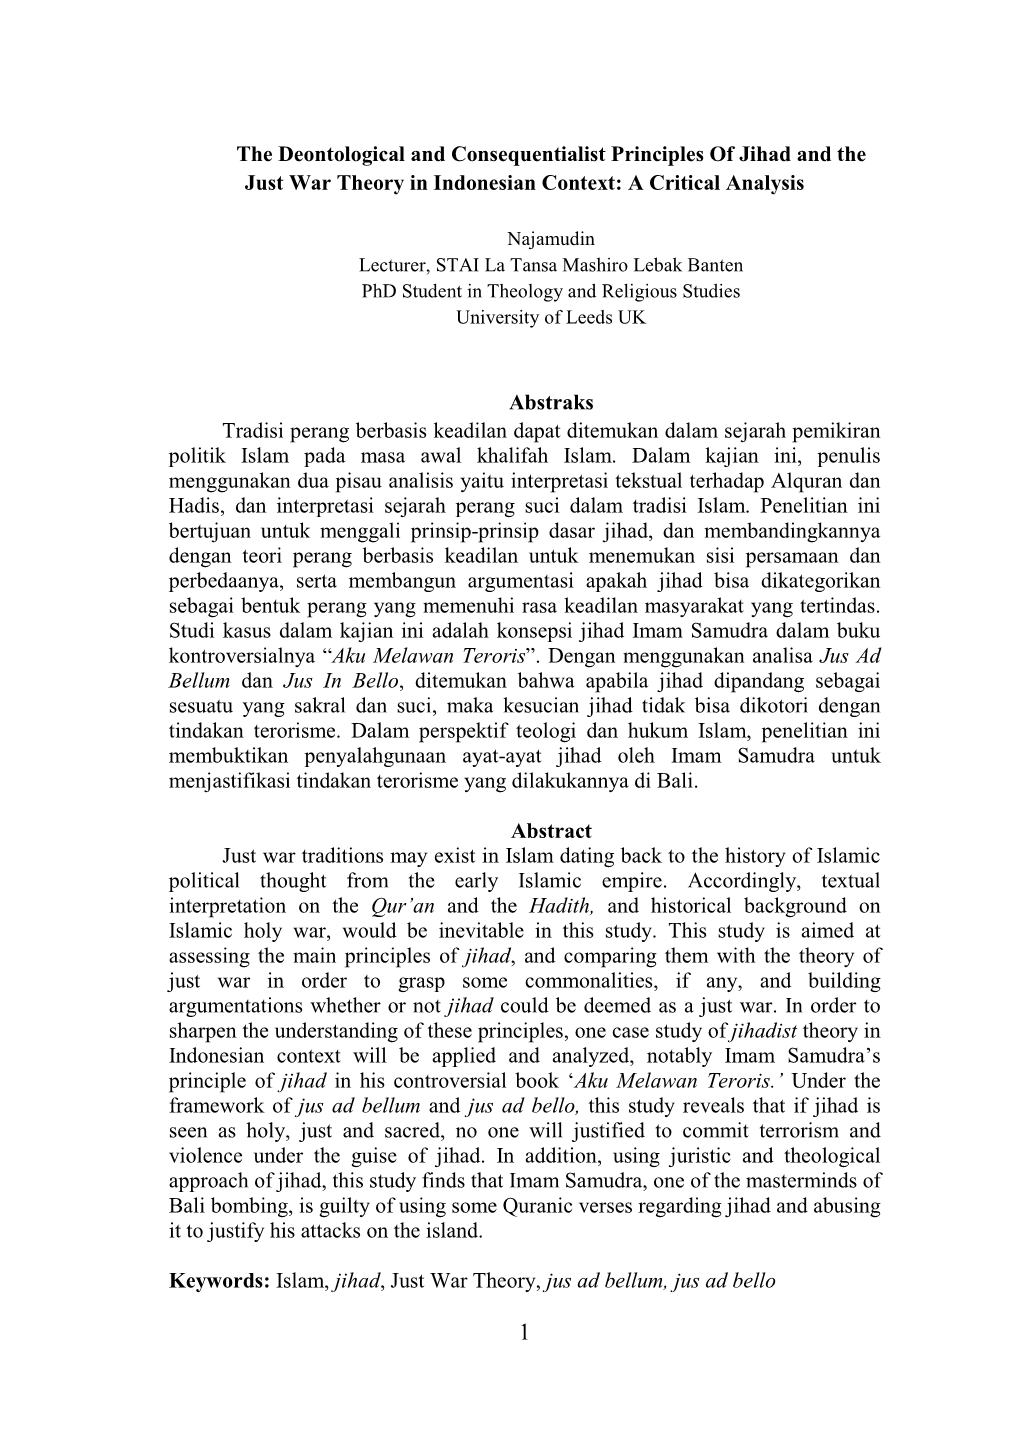 The Deontological and Consequentialist Principles of Jihad and the Just War Theory in Indonesian Context: a Critical Analysis